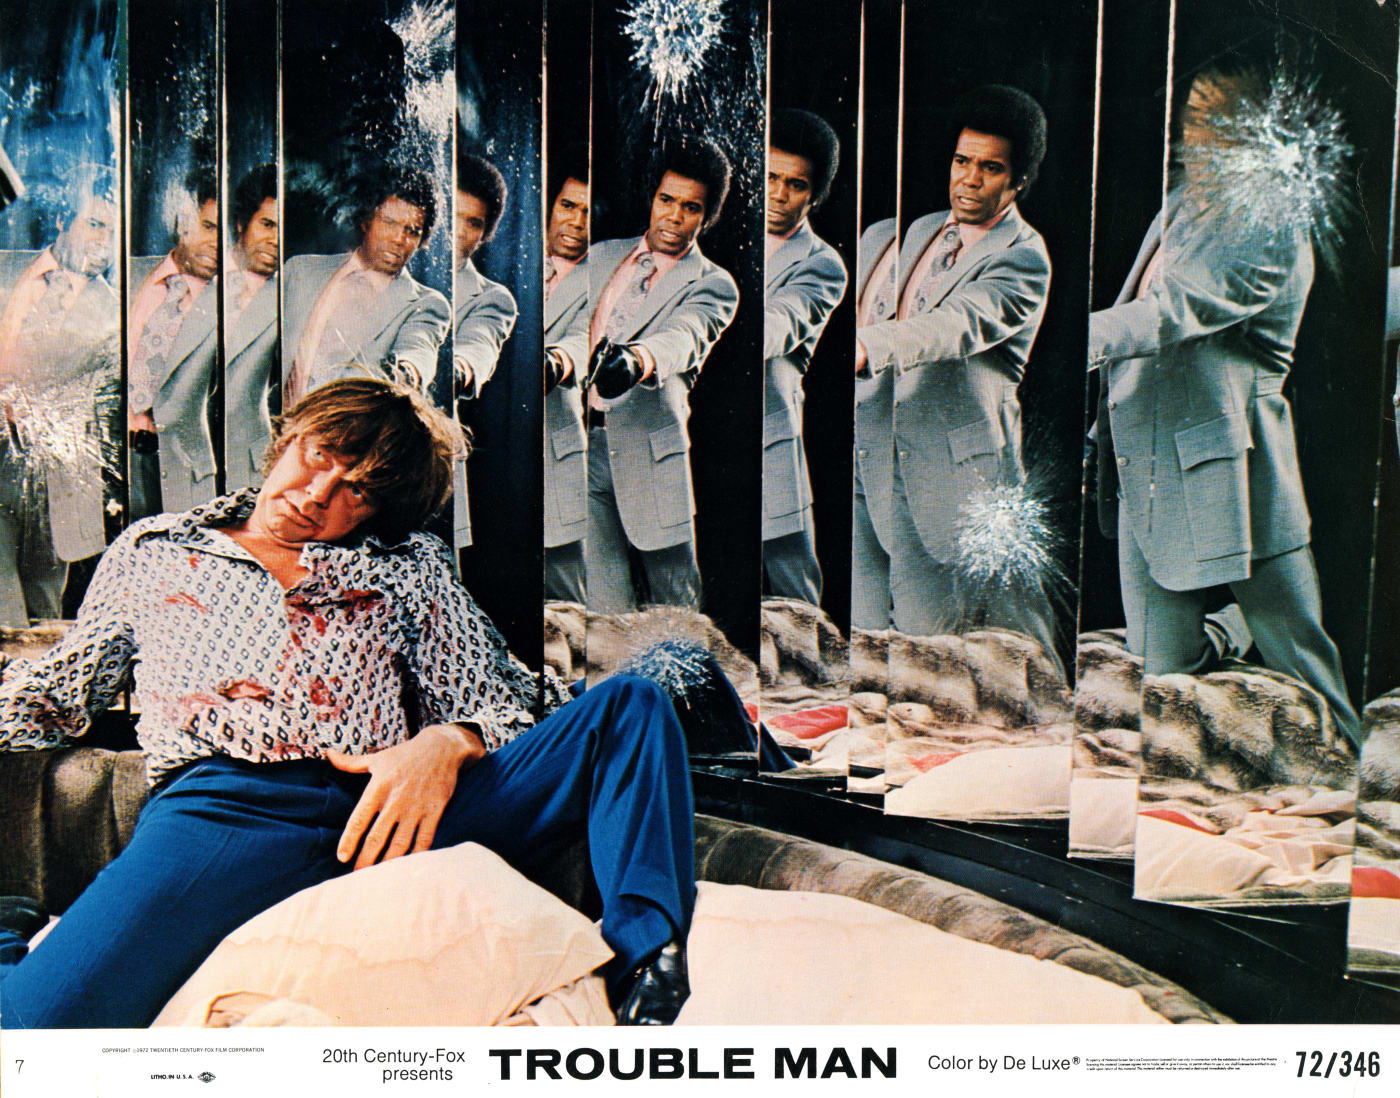 This is the lobby card from Trouble Man.